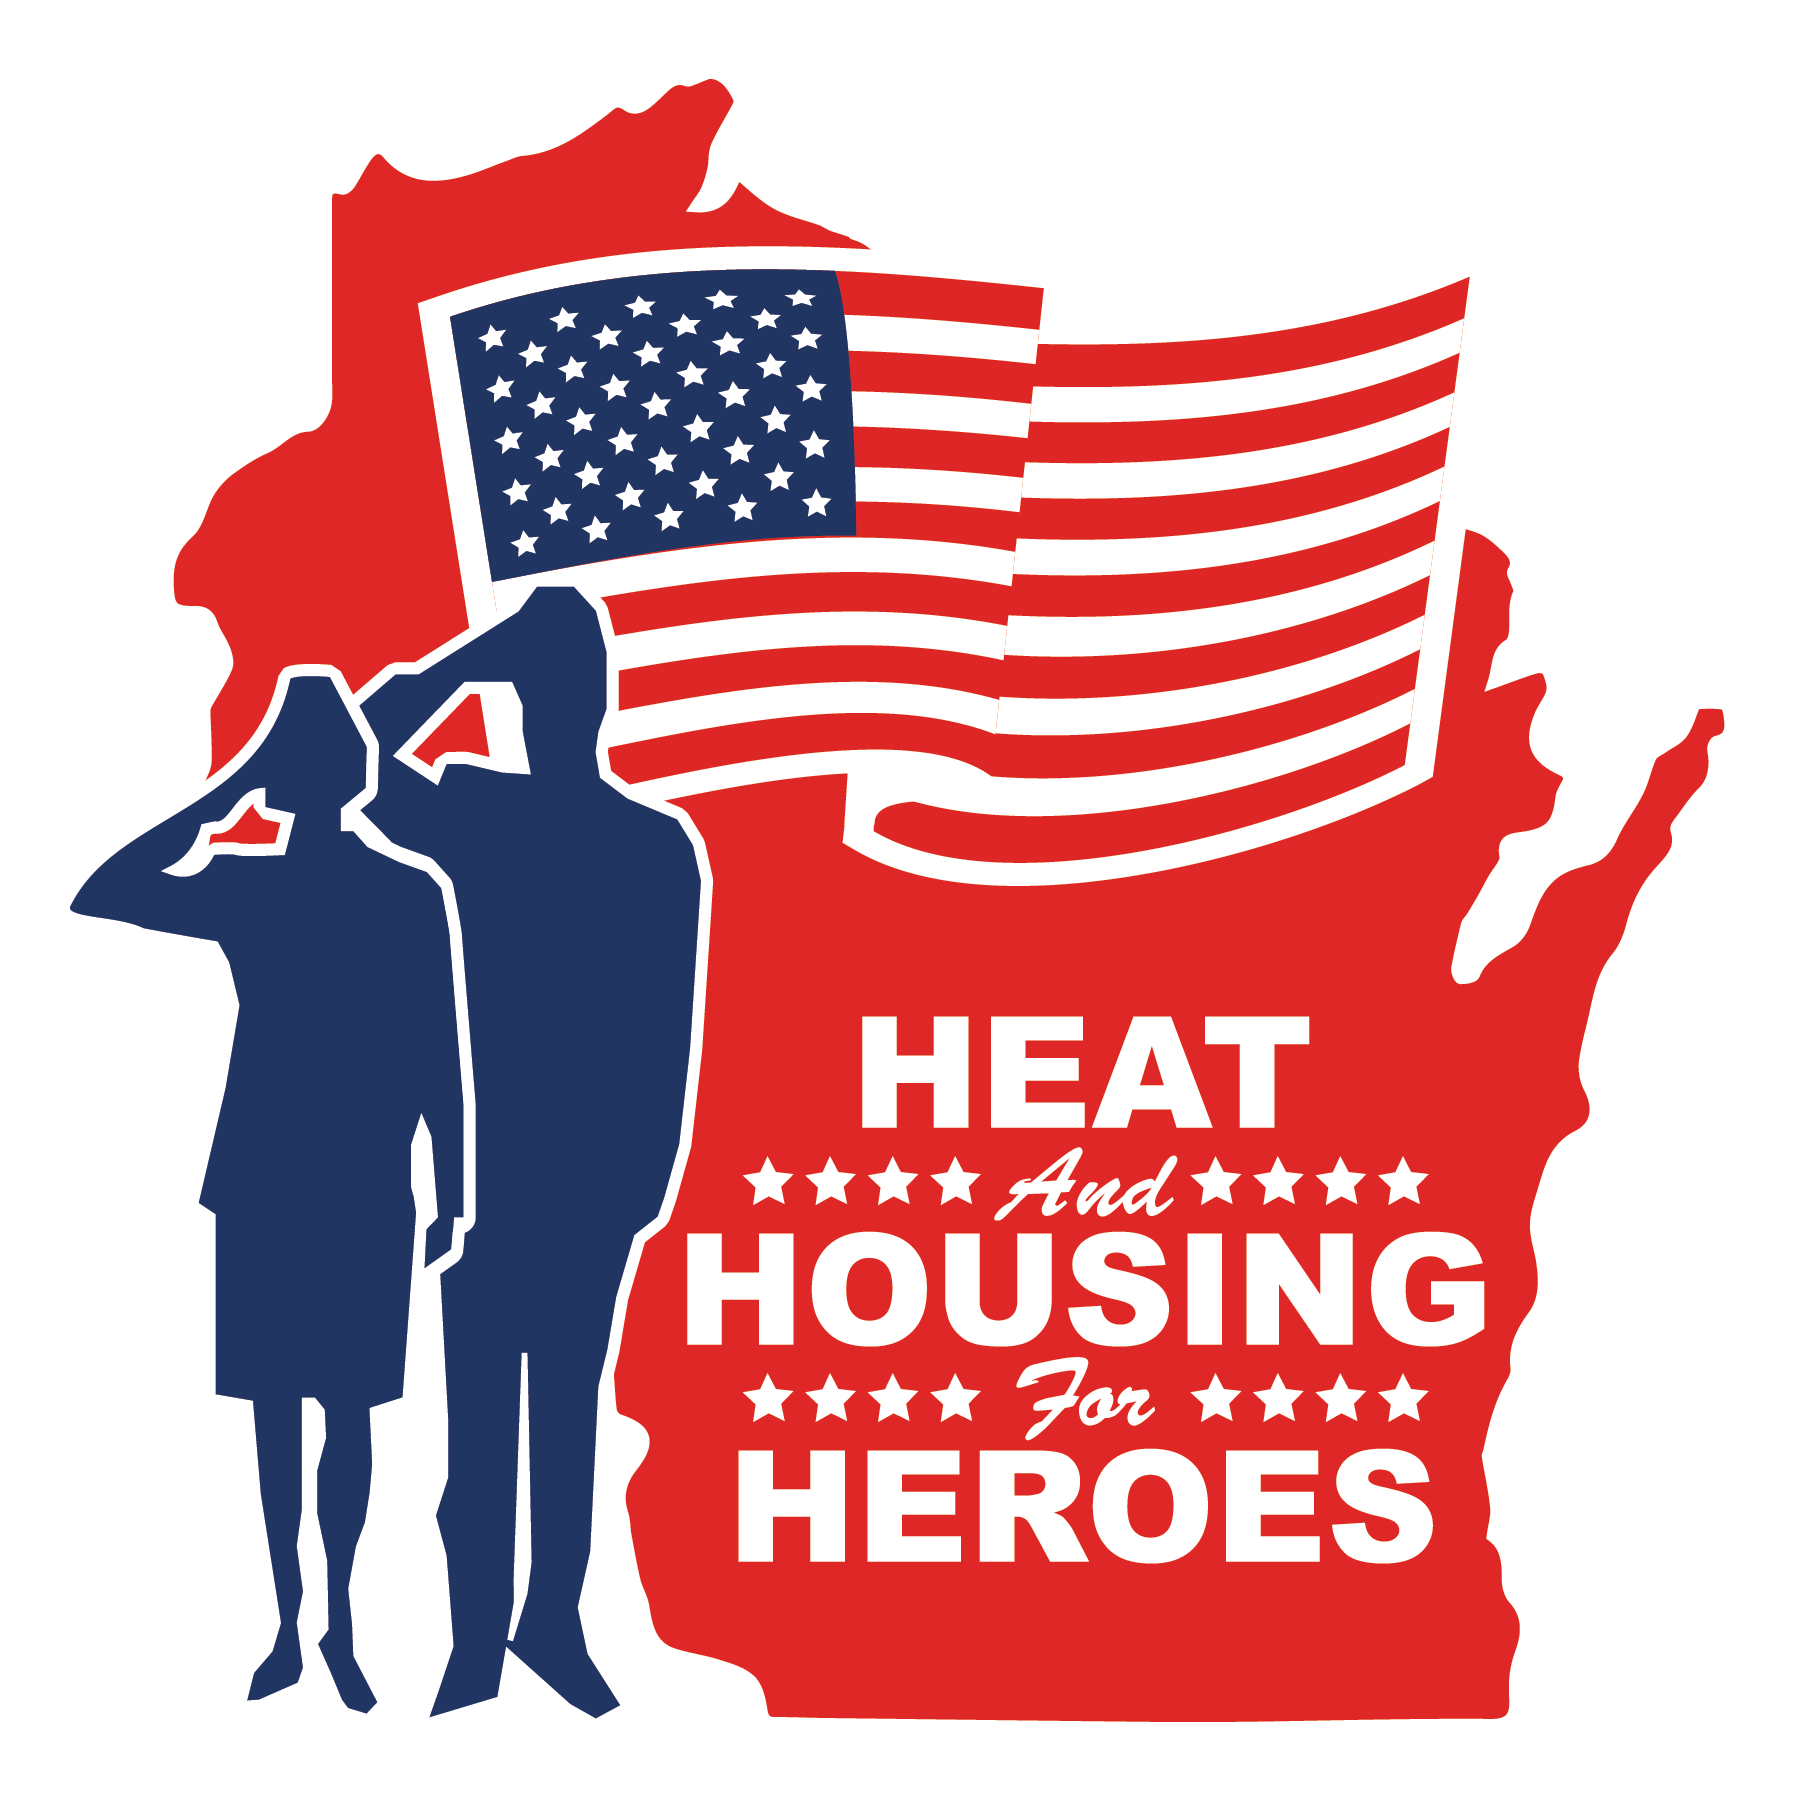 https://heat4heroes.org/sites/heat4heroes.org/assets/images/default/heat-and-housing-for-heroes-WI.png